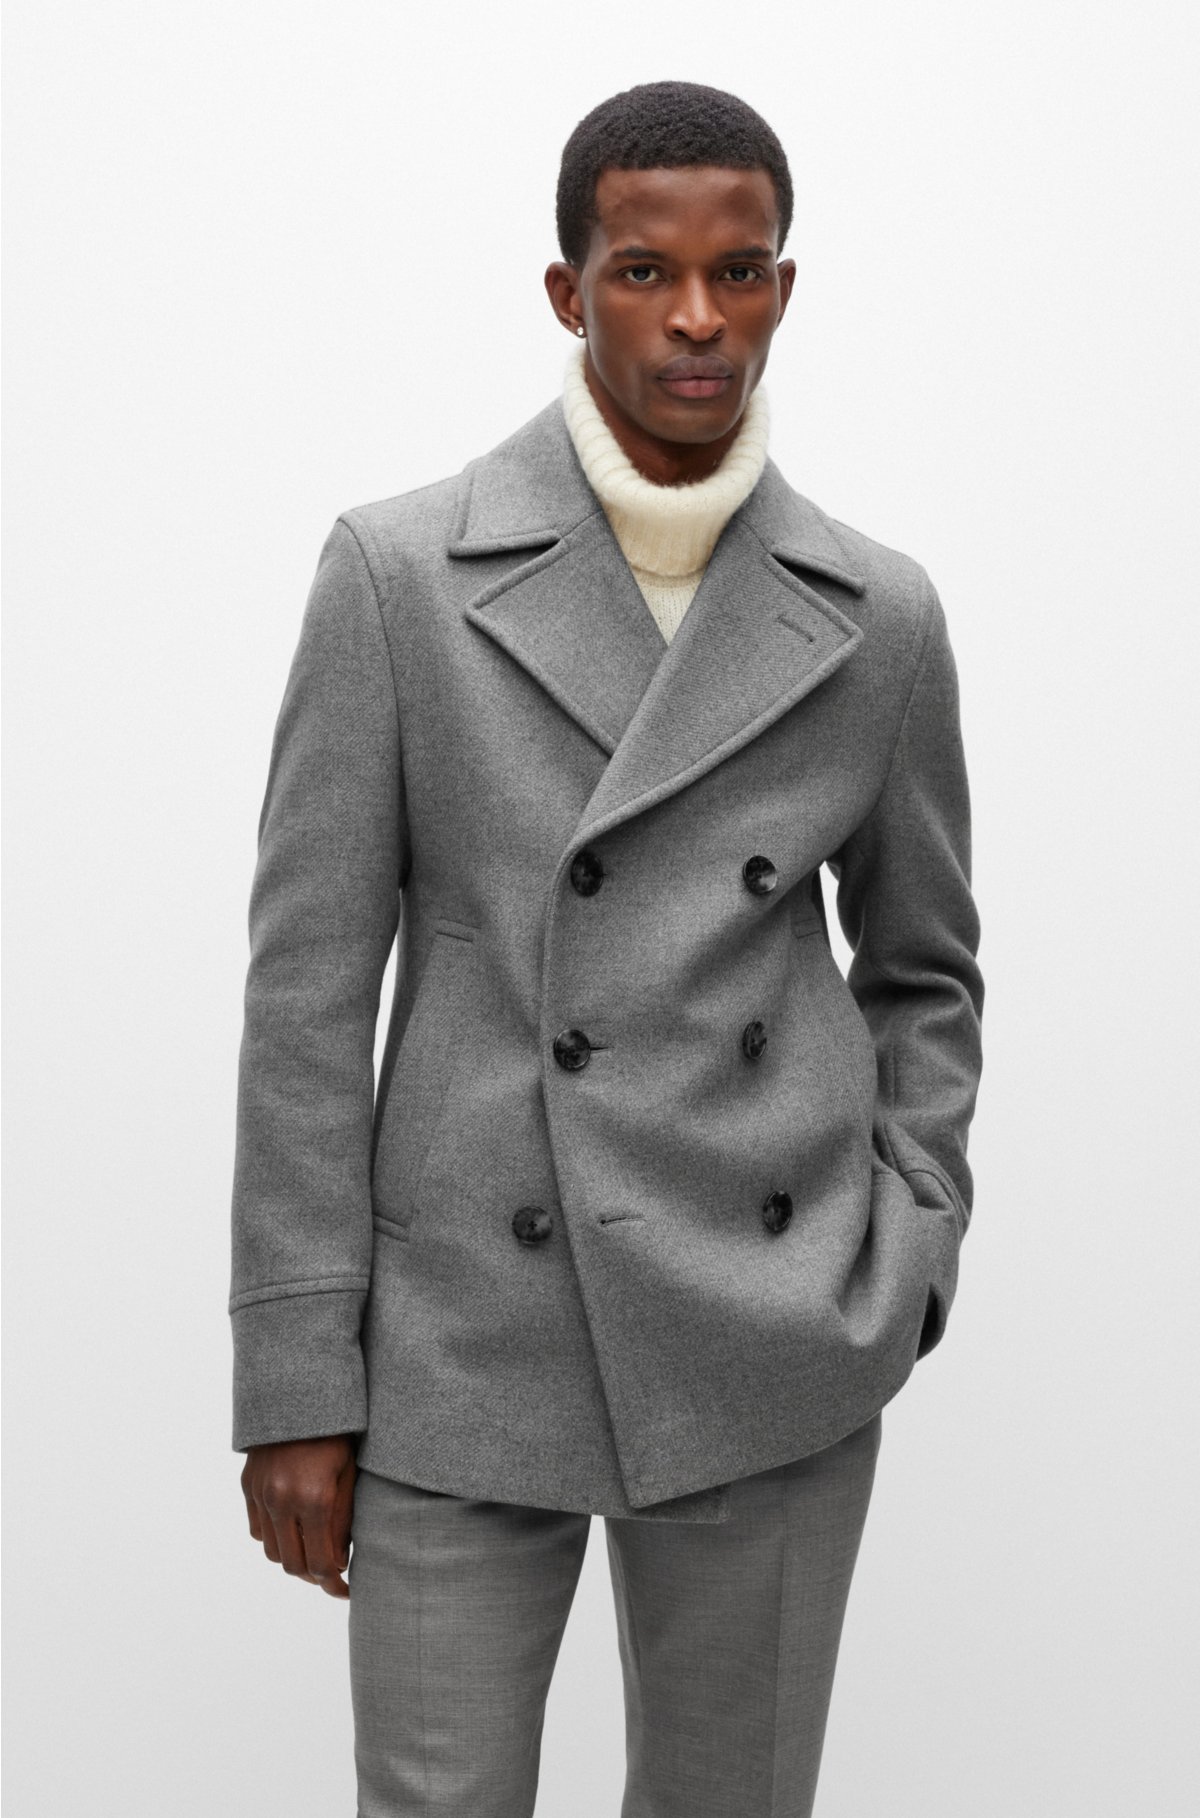 BOSS - Double-breasted, regular-fit coat in a wool blend